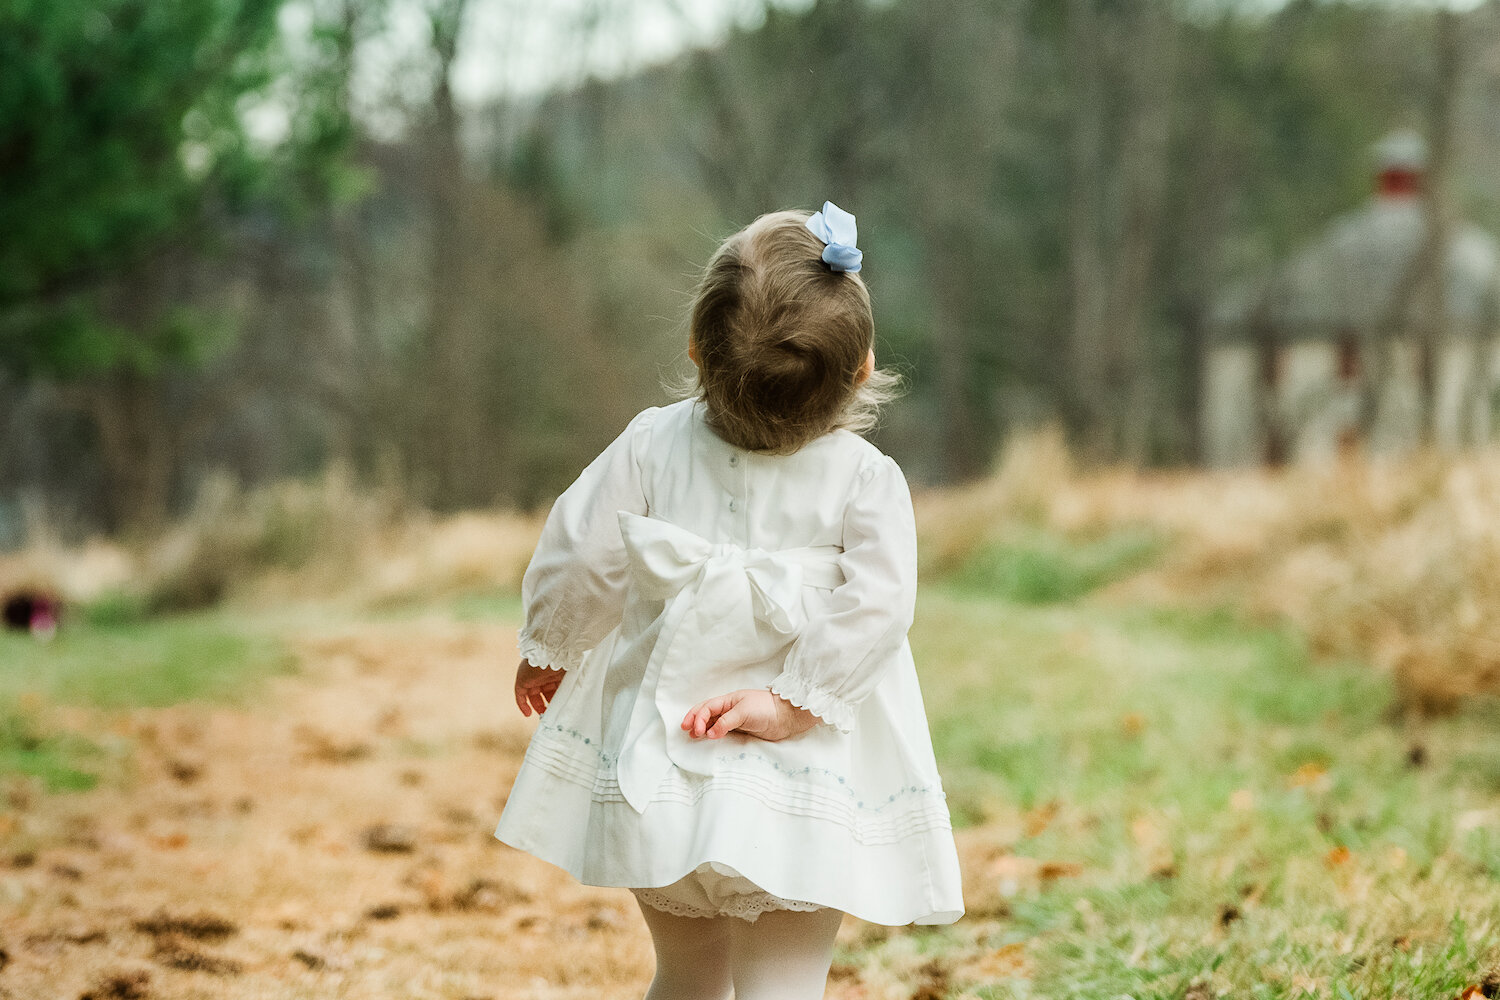 professional photograph of little girl in white dress and bloomers standing in field.